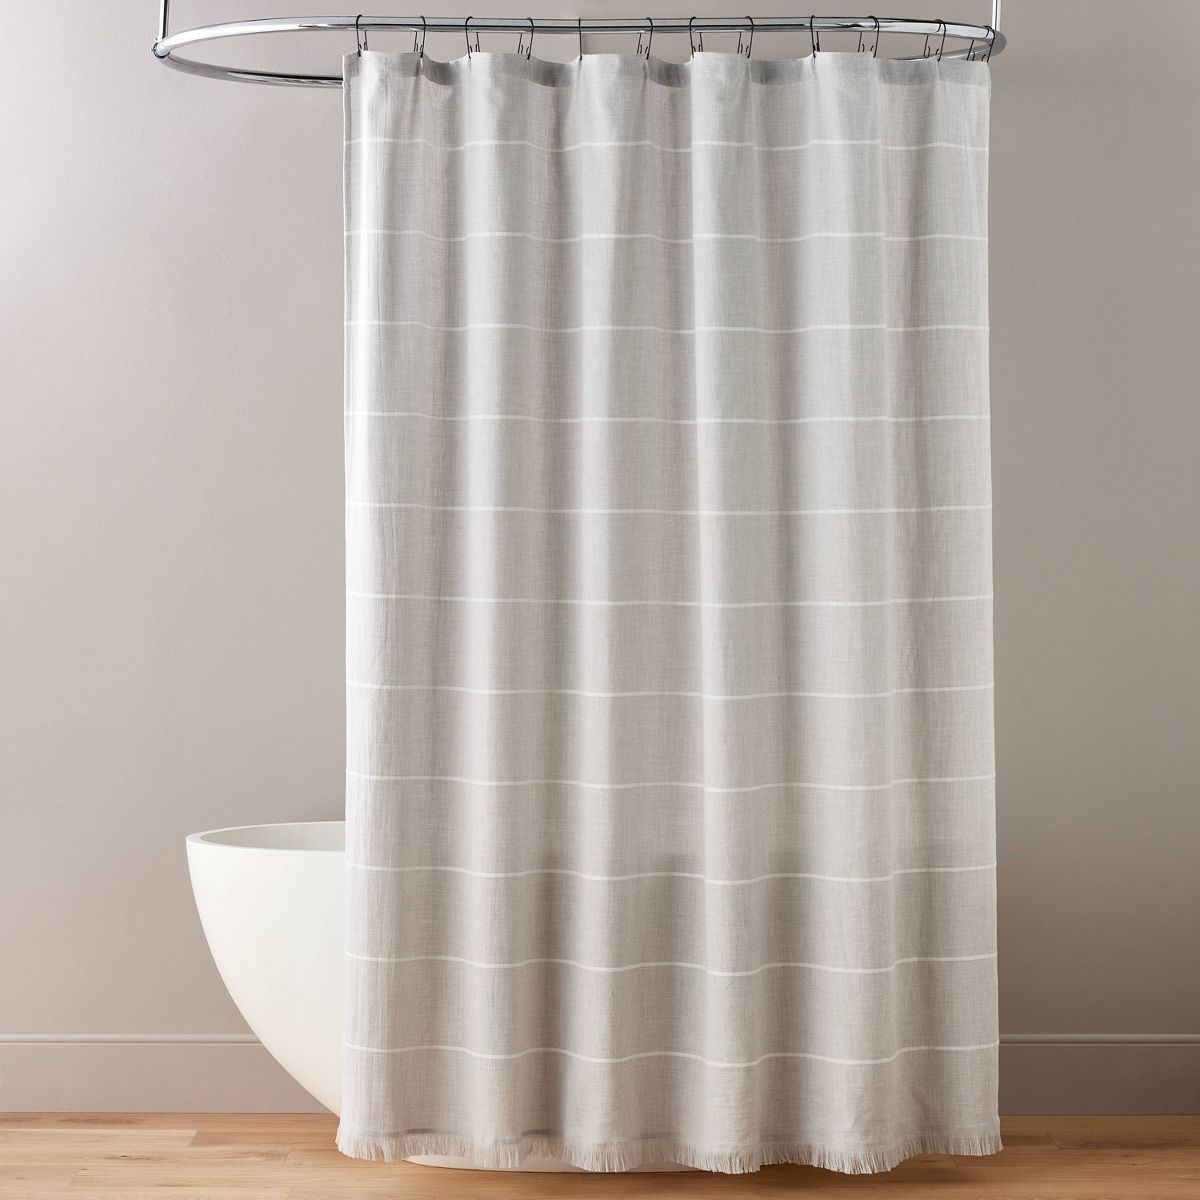 Horizontal Stripe Shower Curtain with Fringe Gray/Cream - Hearth & Hand™ with Magnolia | Target